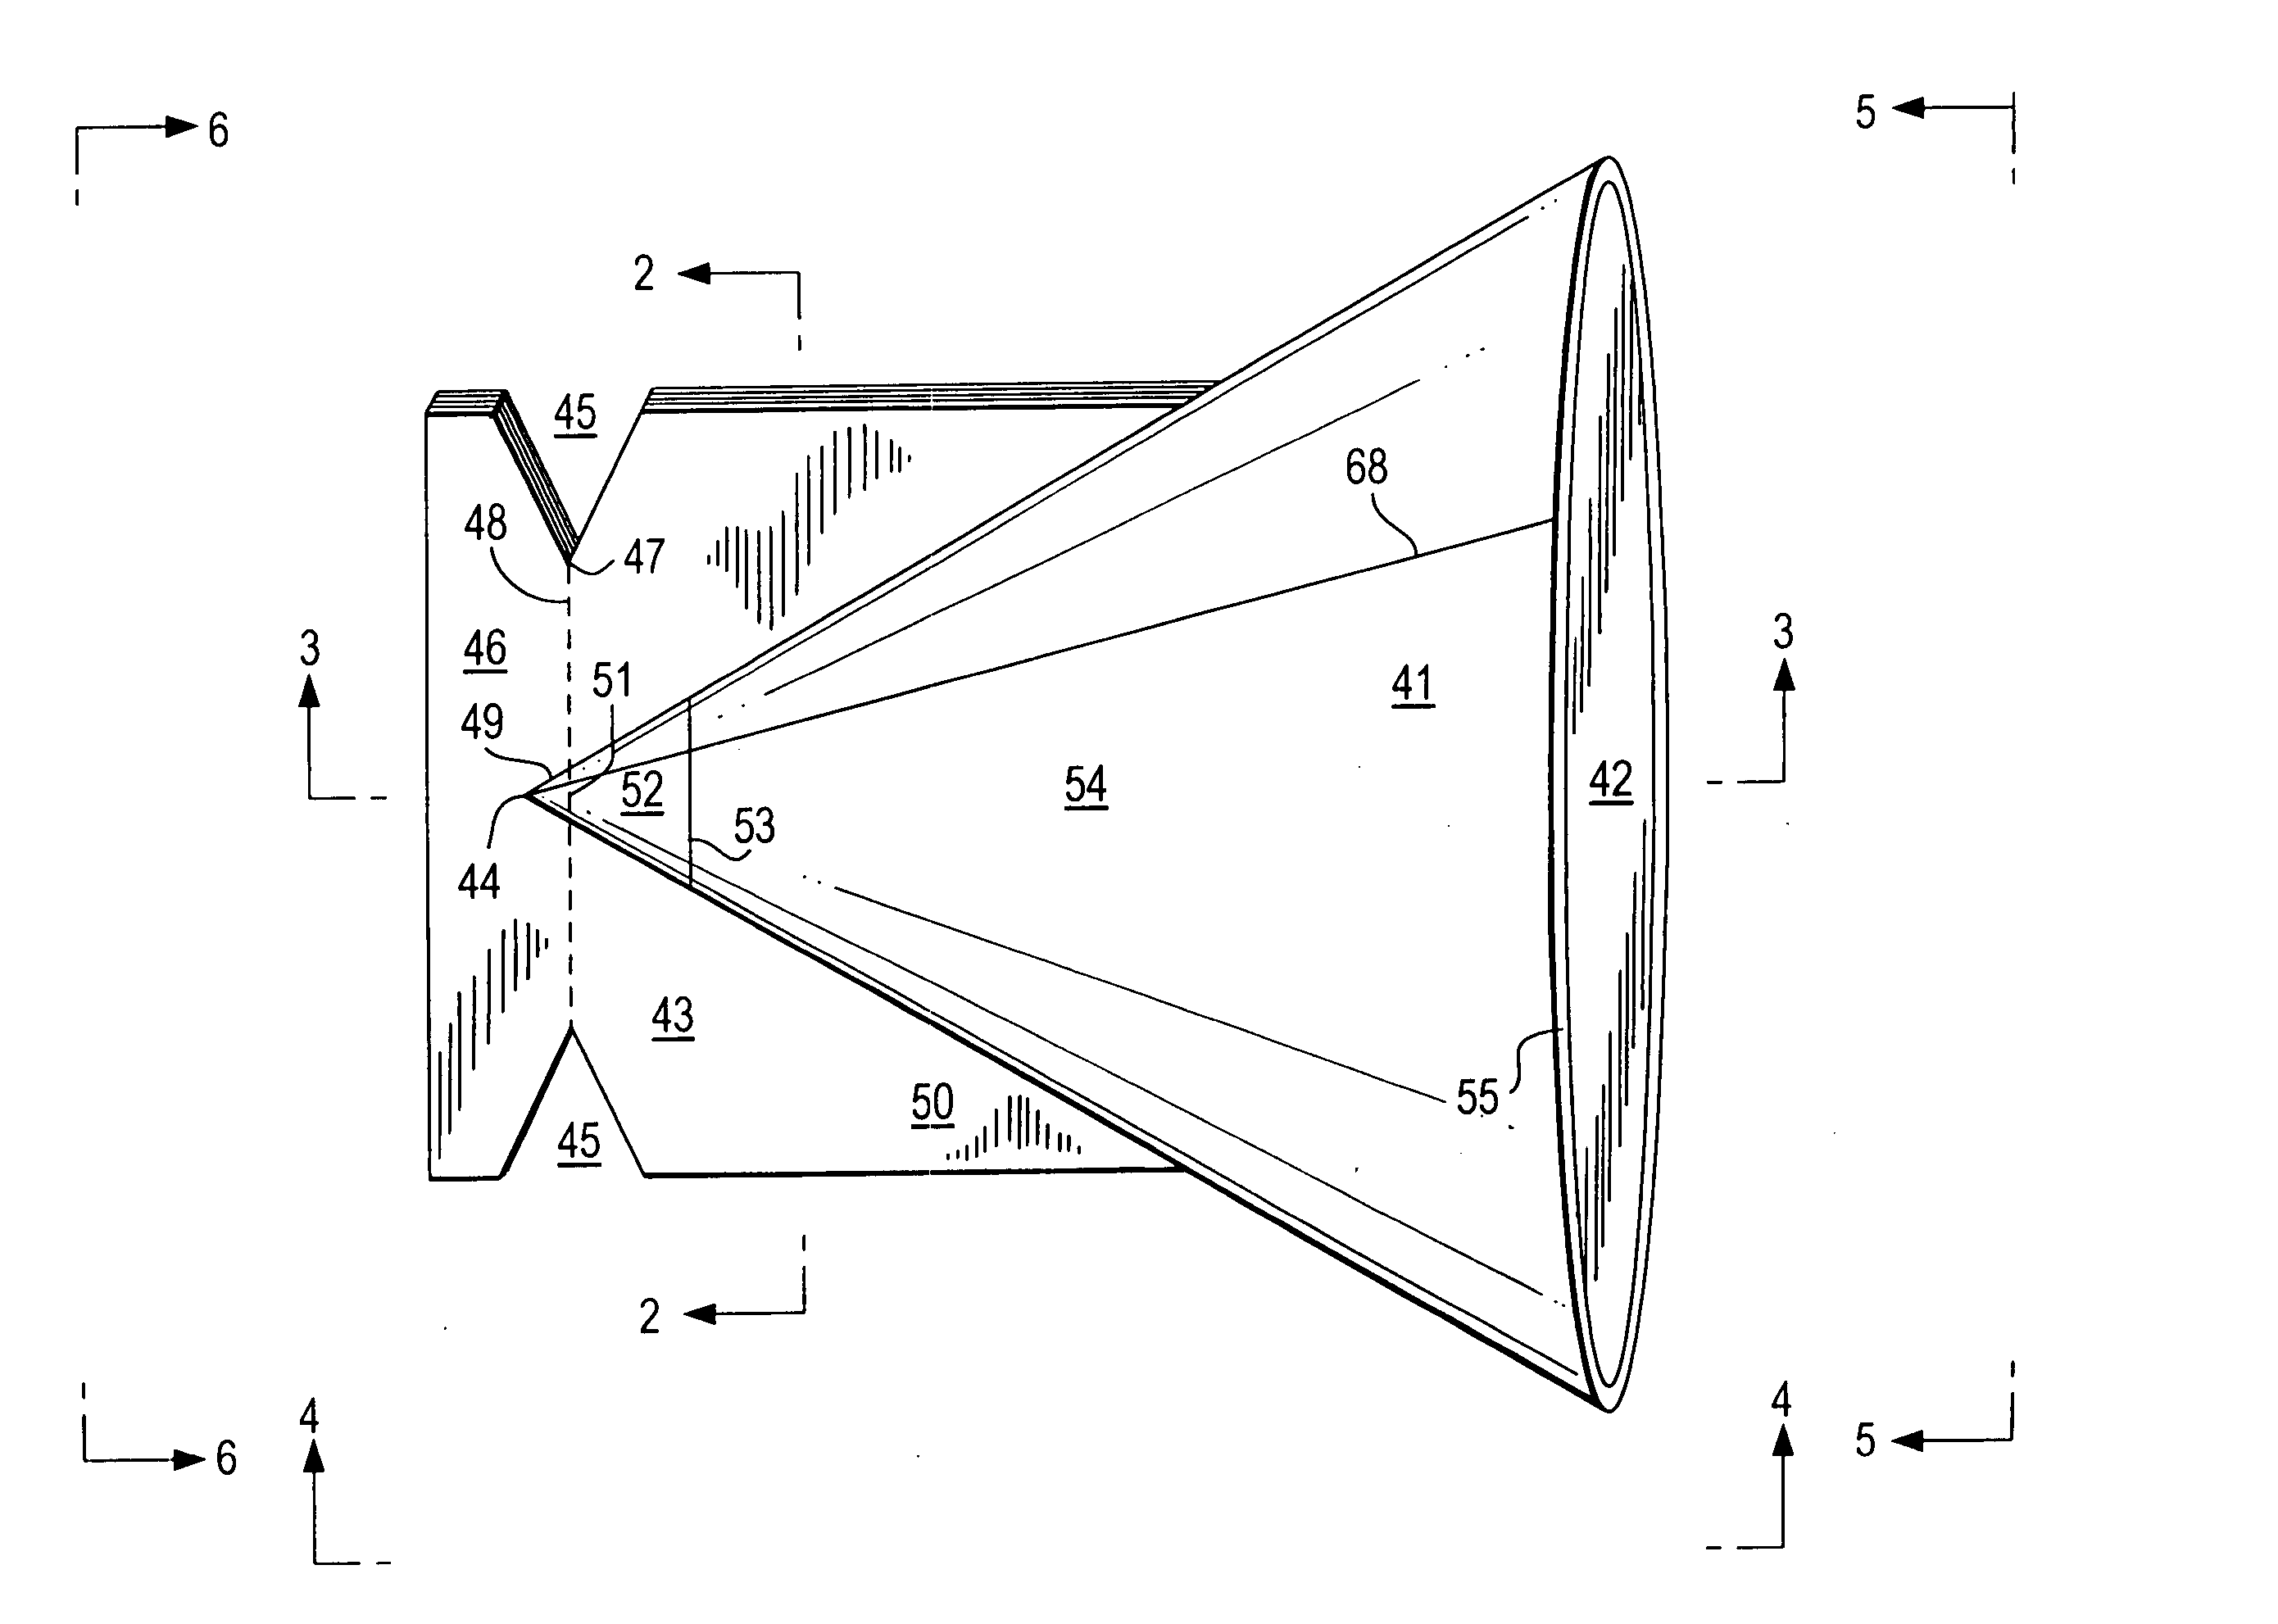 Conical reinforced re-sealable dispenser